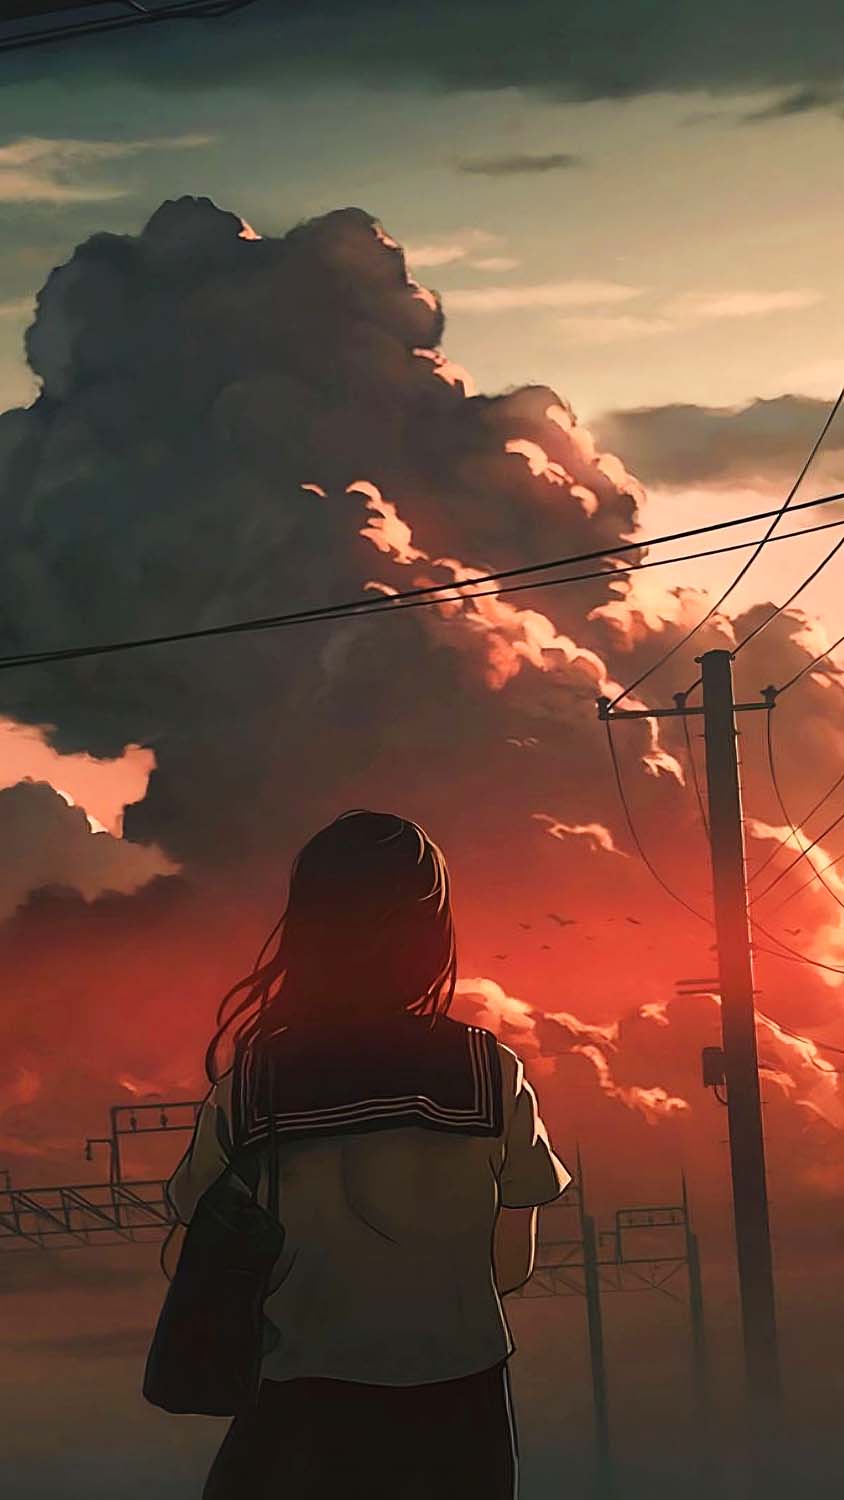 Girl and Cloudy Sunset iPhone Wallpaper HD